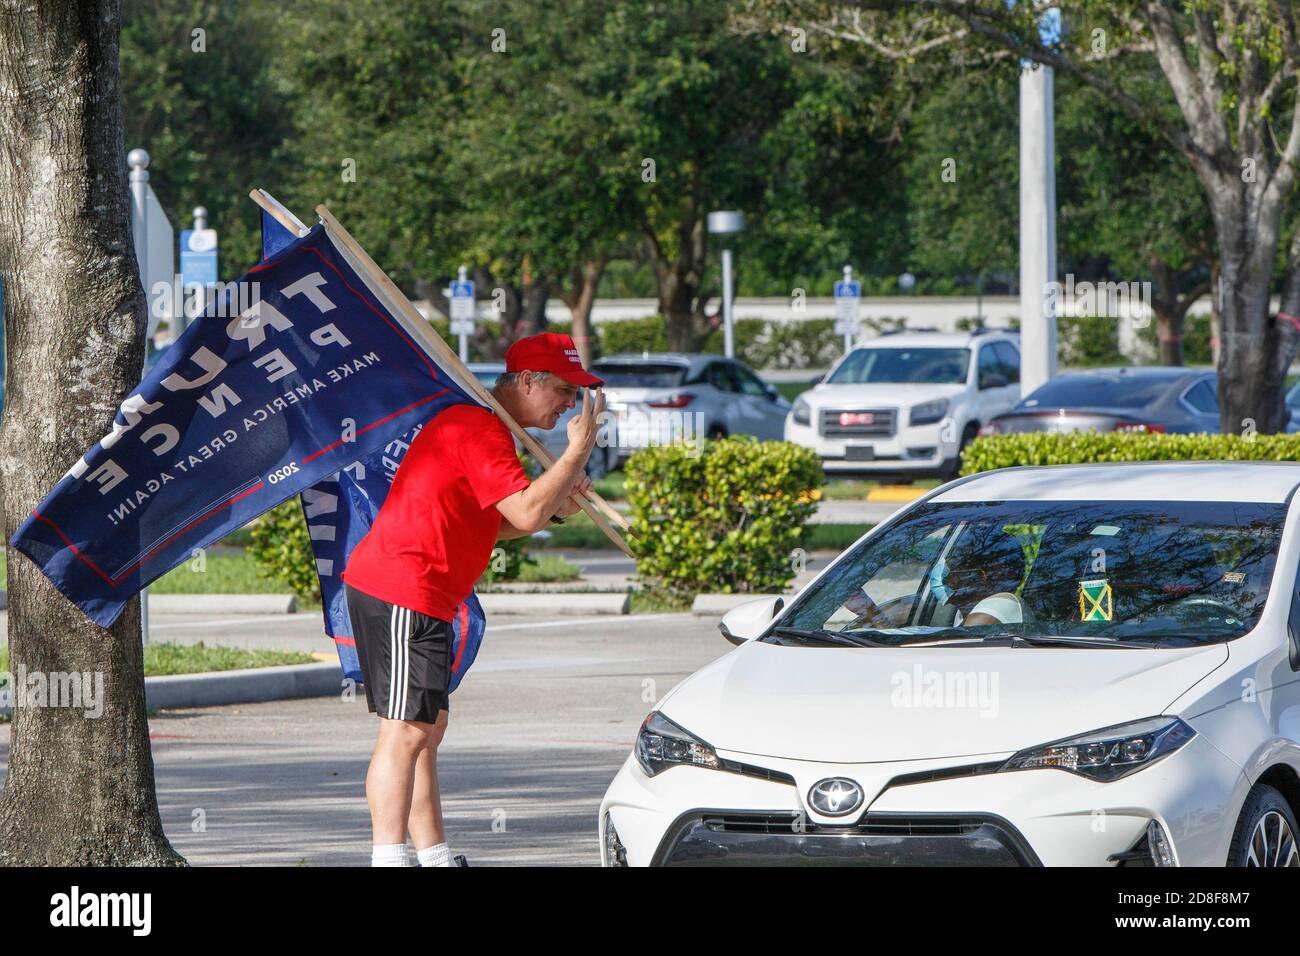 Coconut Creek, United States. 29th Oct, 2020. October 29, 2020 - Coconut Creek, FL: President Trump supporters protest outside former Vice President Joe Biden's 2020 Presidential Campaign event at Broward College on October 29, 2020 in Coconut Creek, Florida. Credit: Maurice Ross/The Photo Access Credit: The Photo Access/Alamy Live News Stock Photo